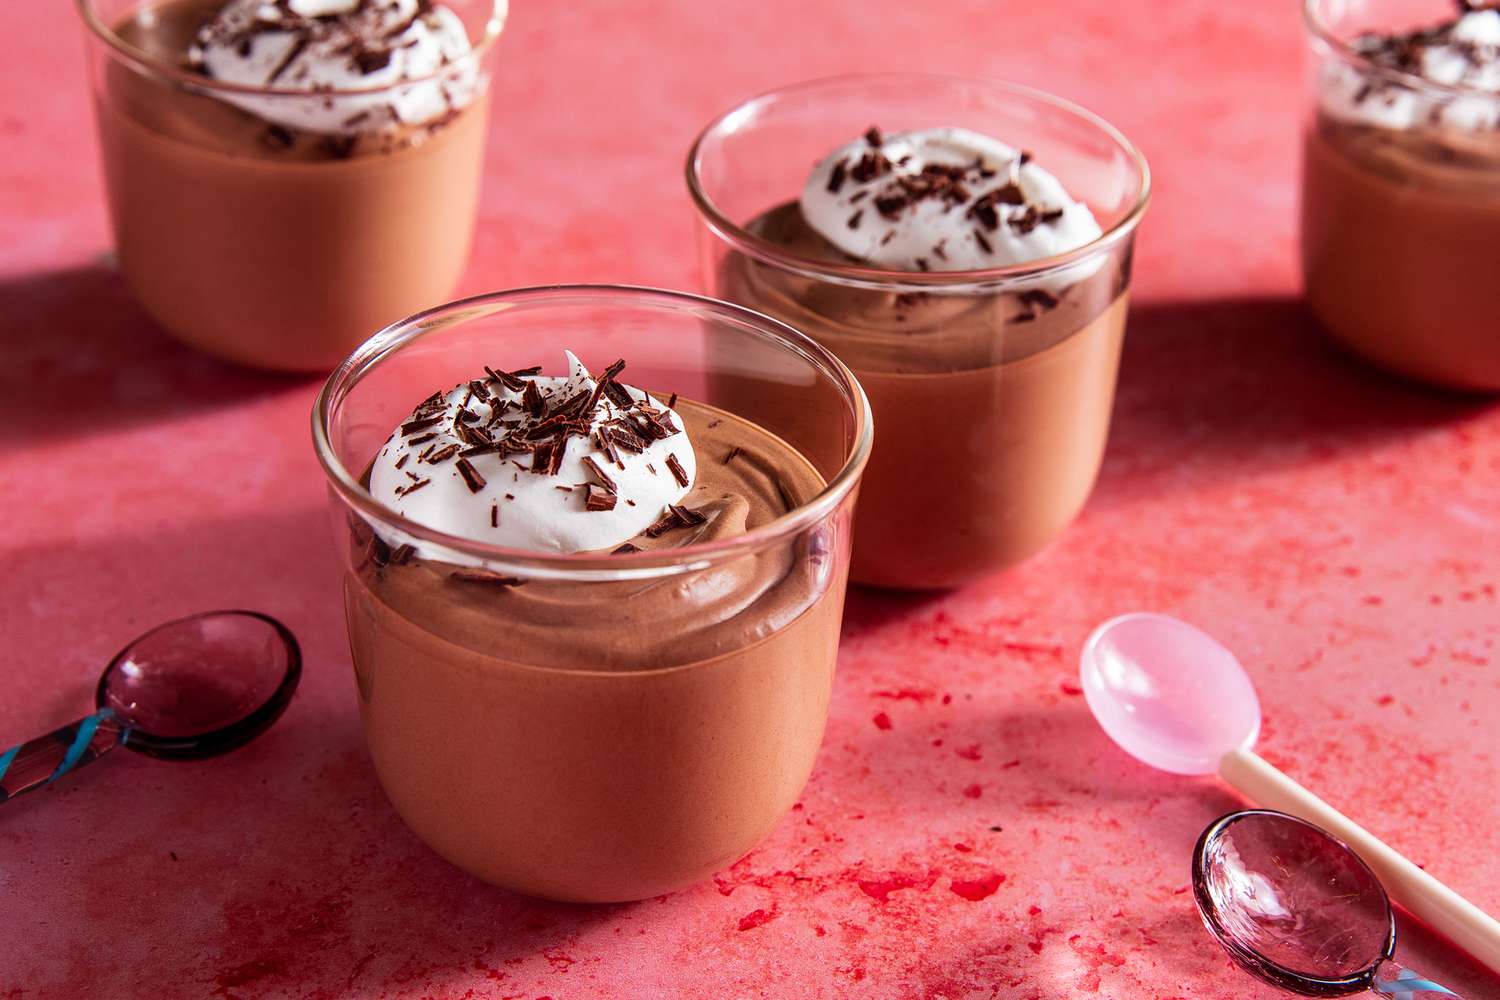 6. Classic Chocolate Mousse Cups: Best in Dessert Cup Recipes